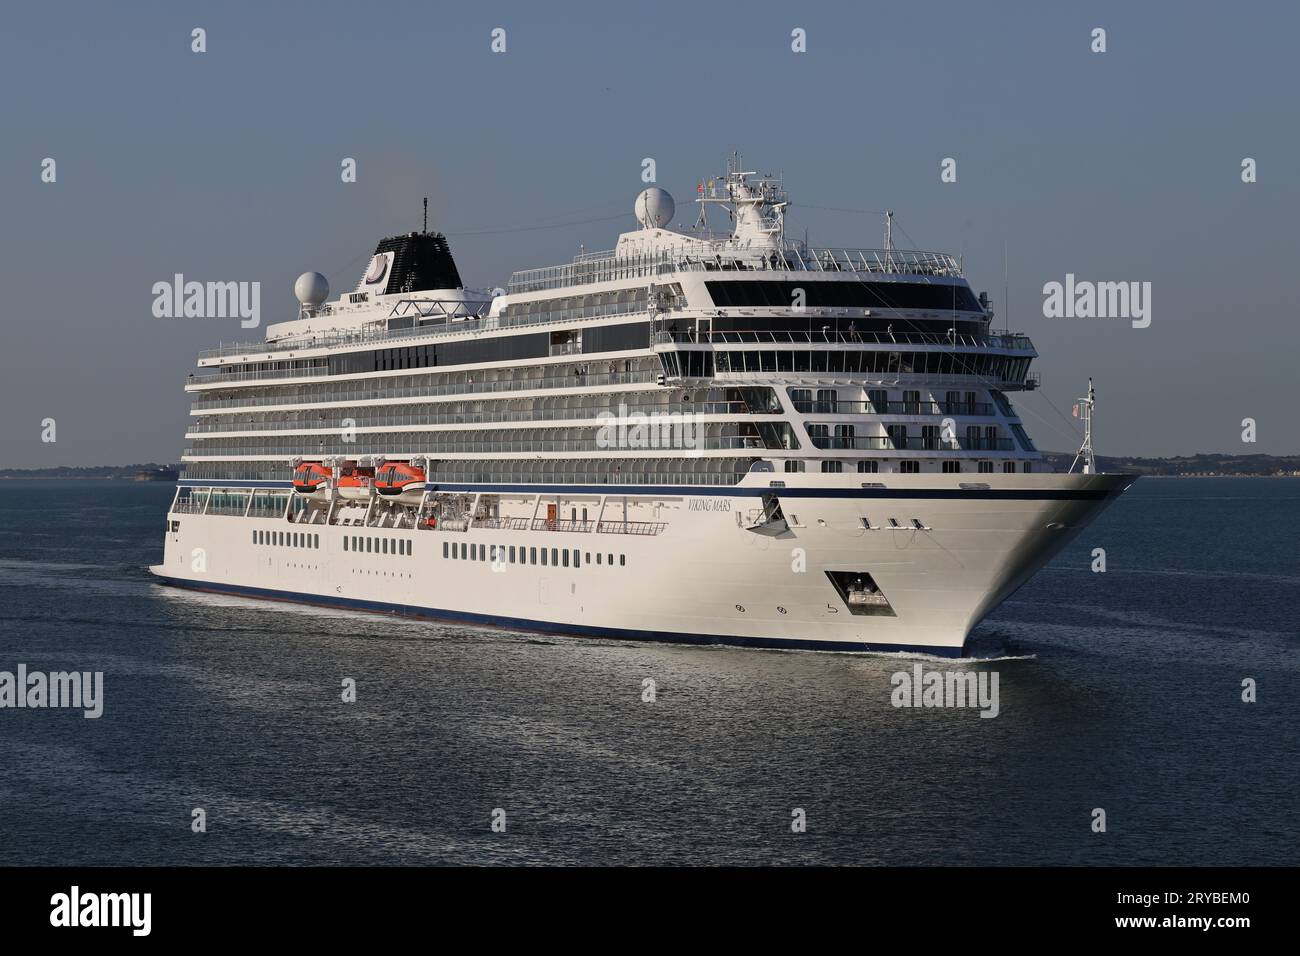 The cruise ship MS VIKING MARS approaching the entrance to the harbour Stock Photo